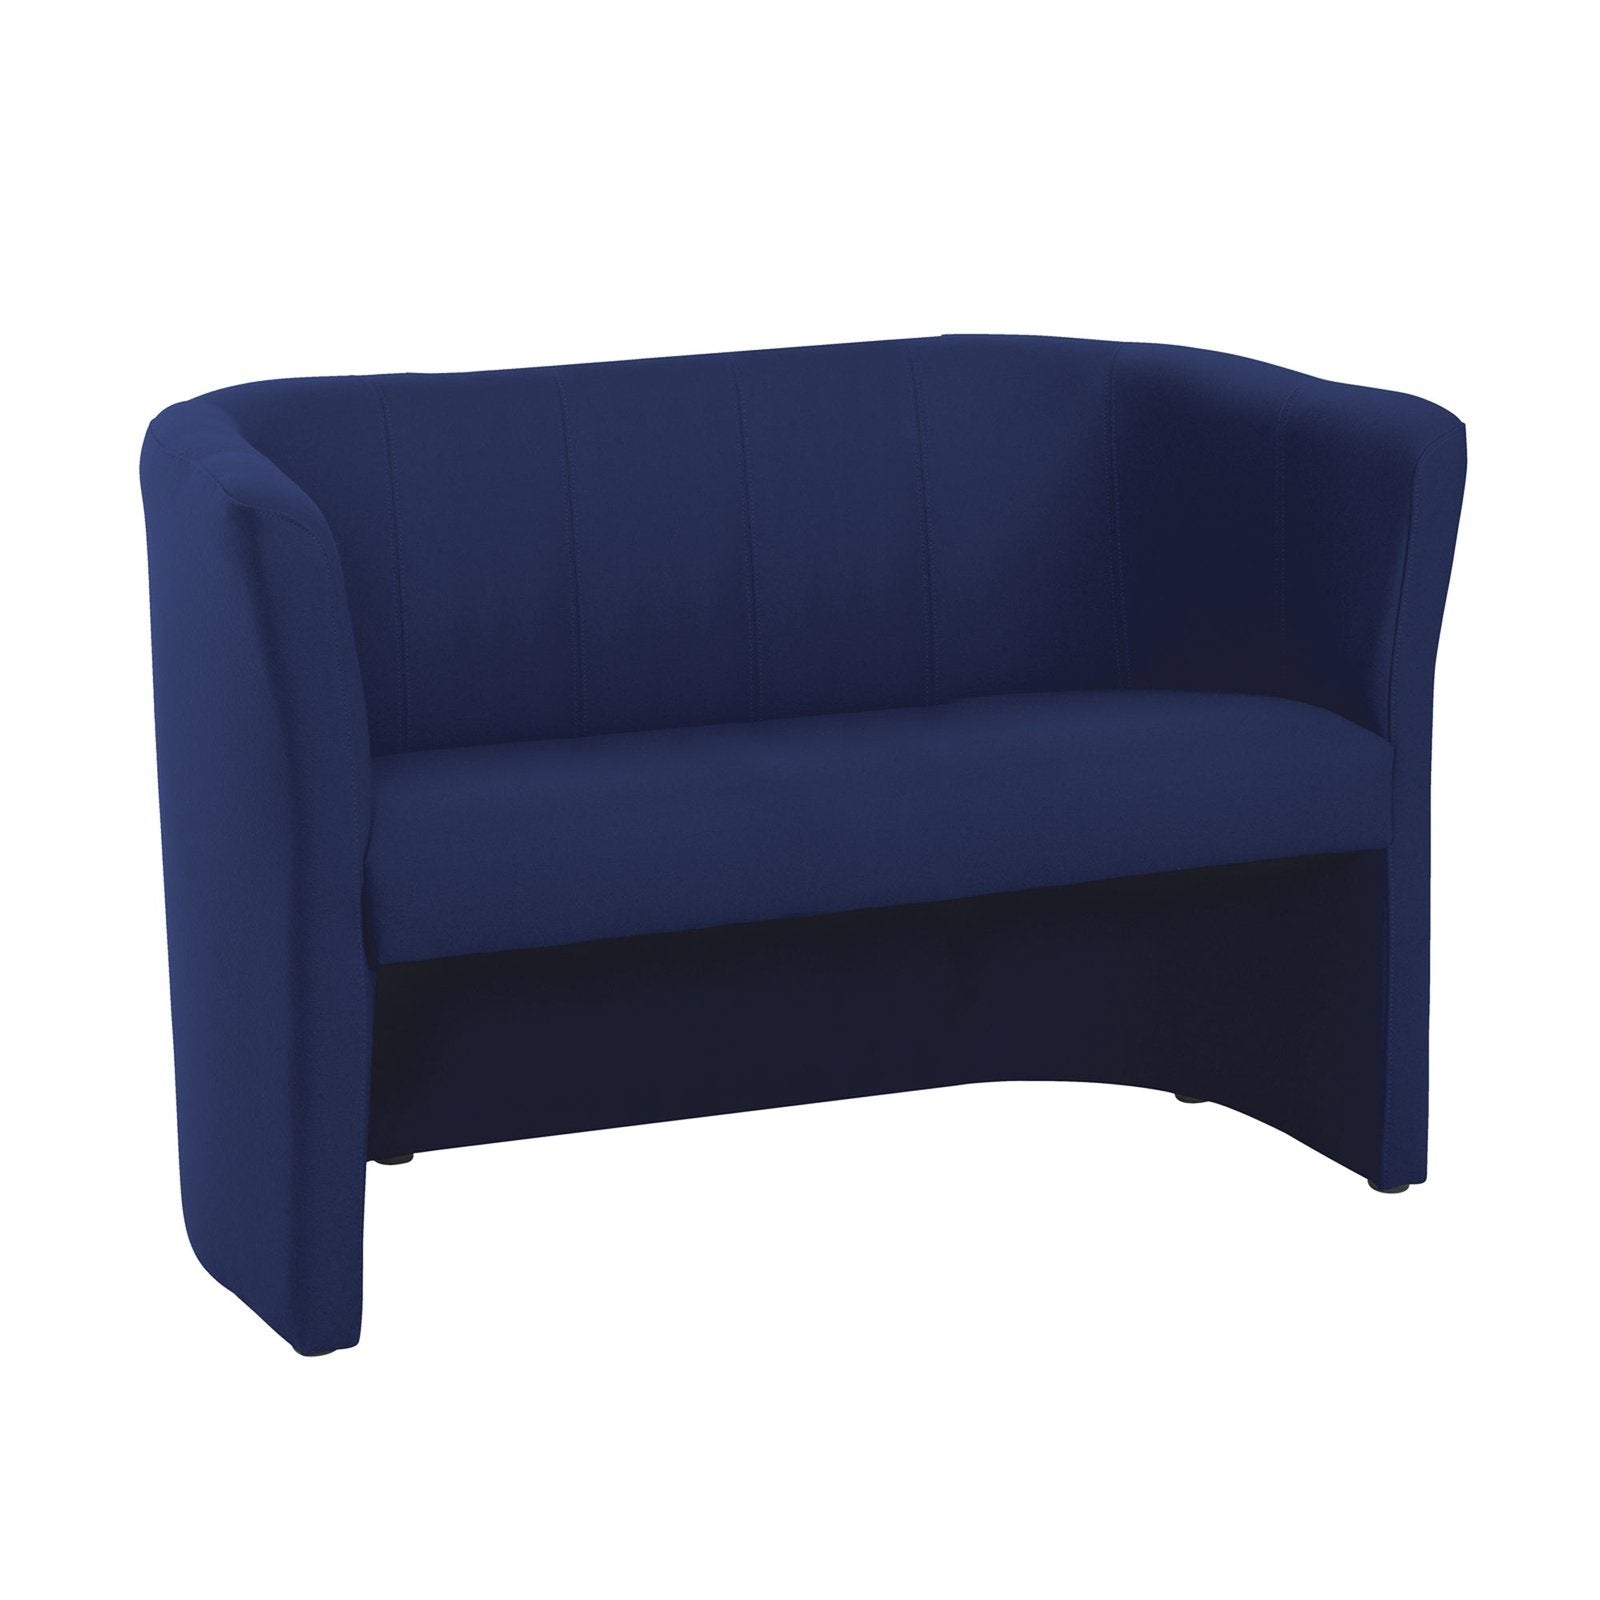 Celestra sofa - Office Products Online